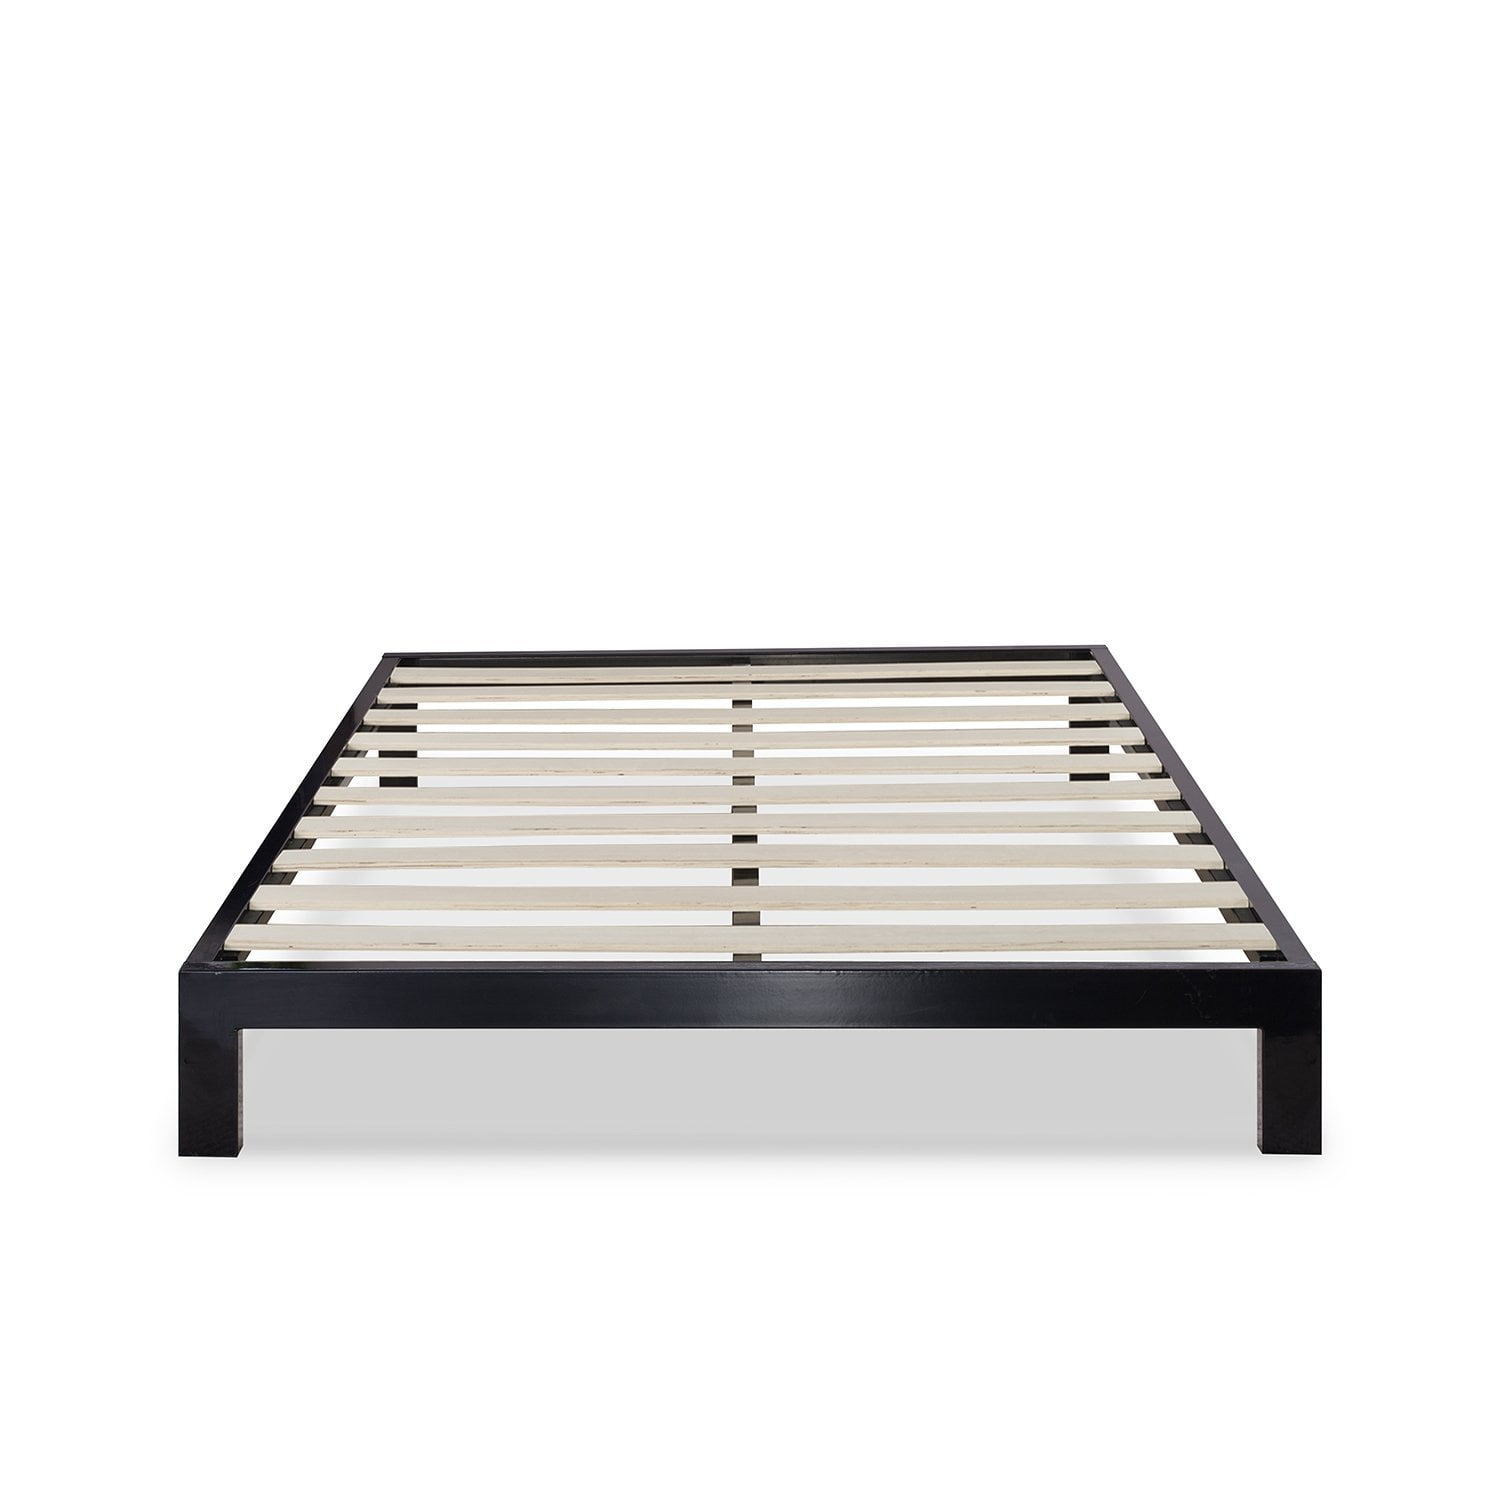 Metal Bed Frame Mattress Foundation, Does A Metal Bed Frame Need A Boxspring